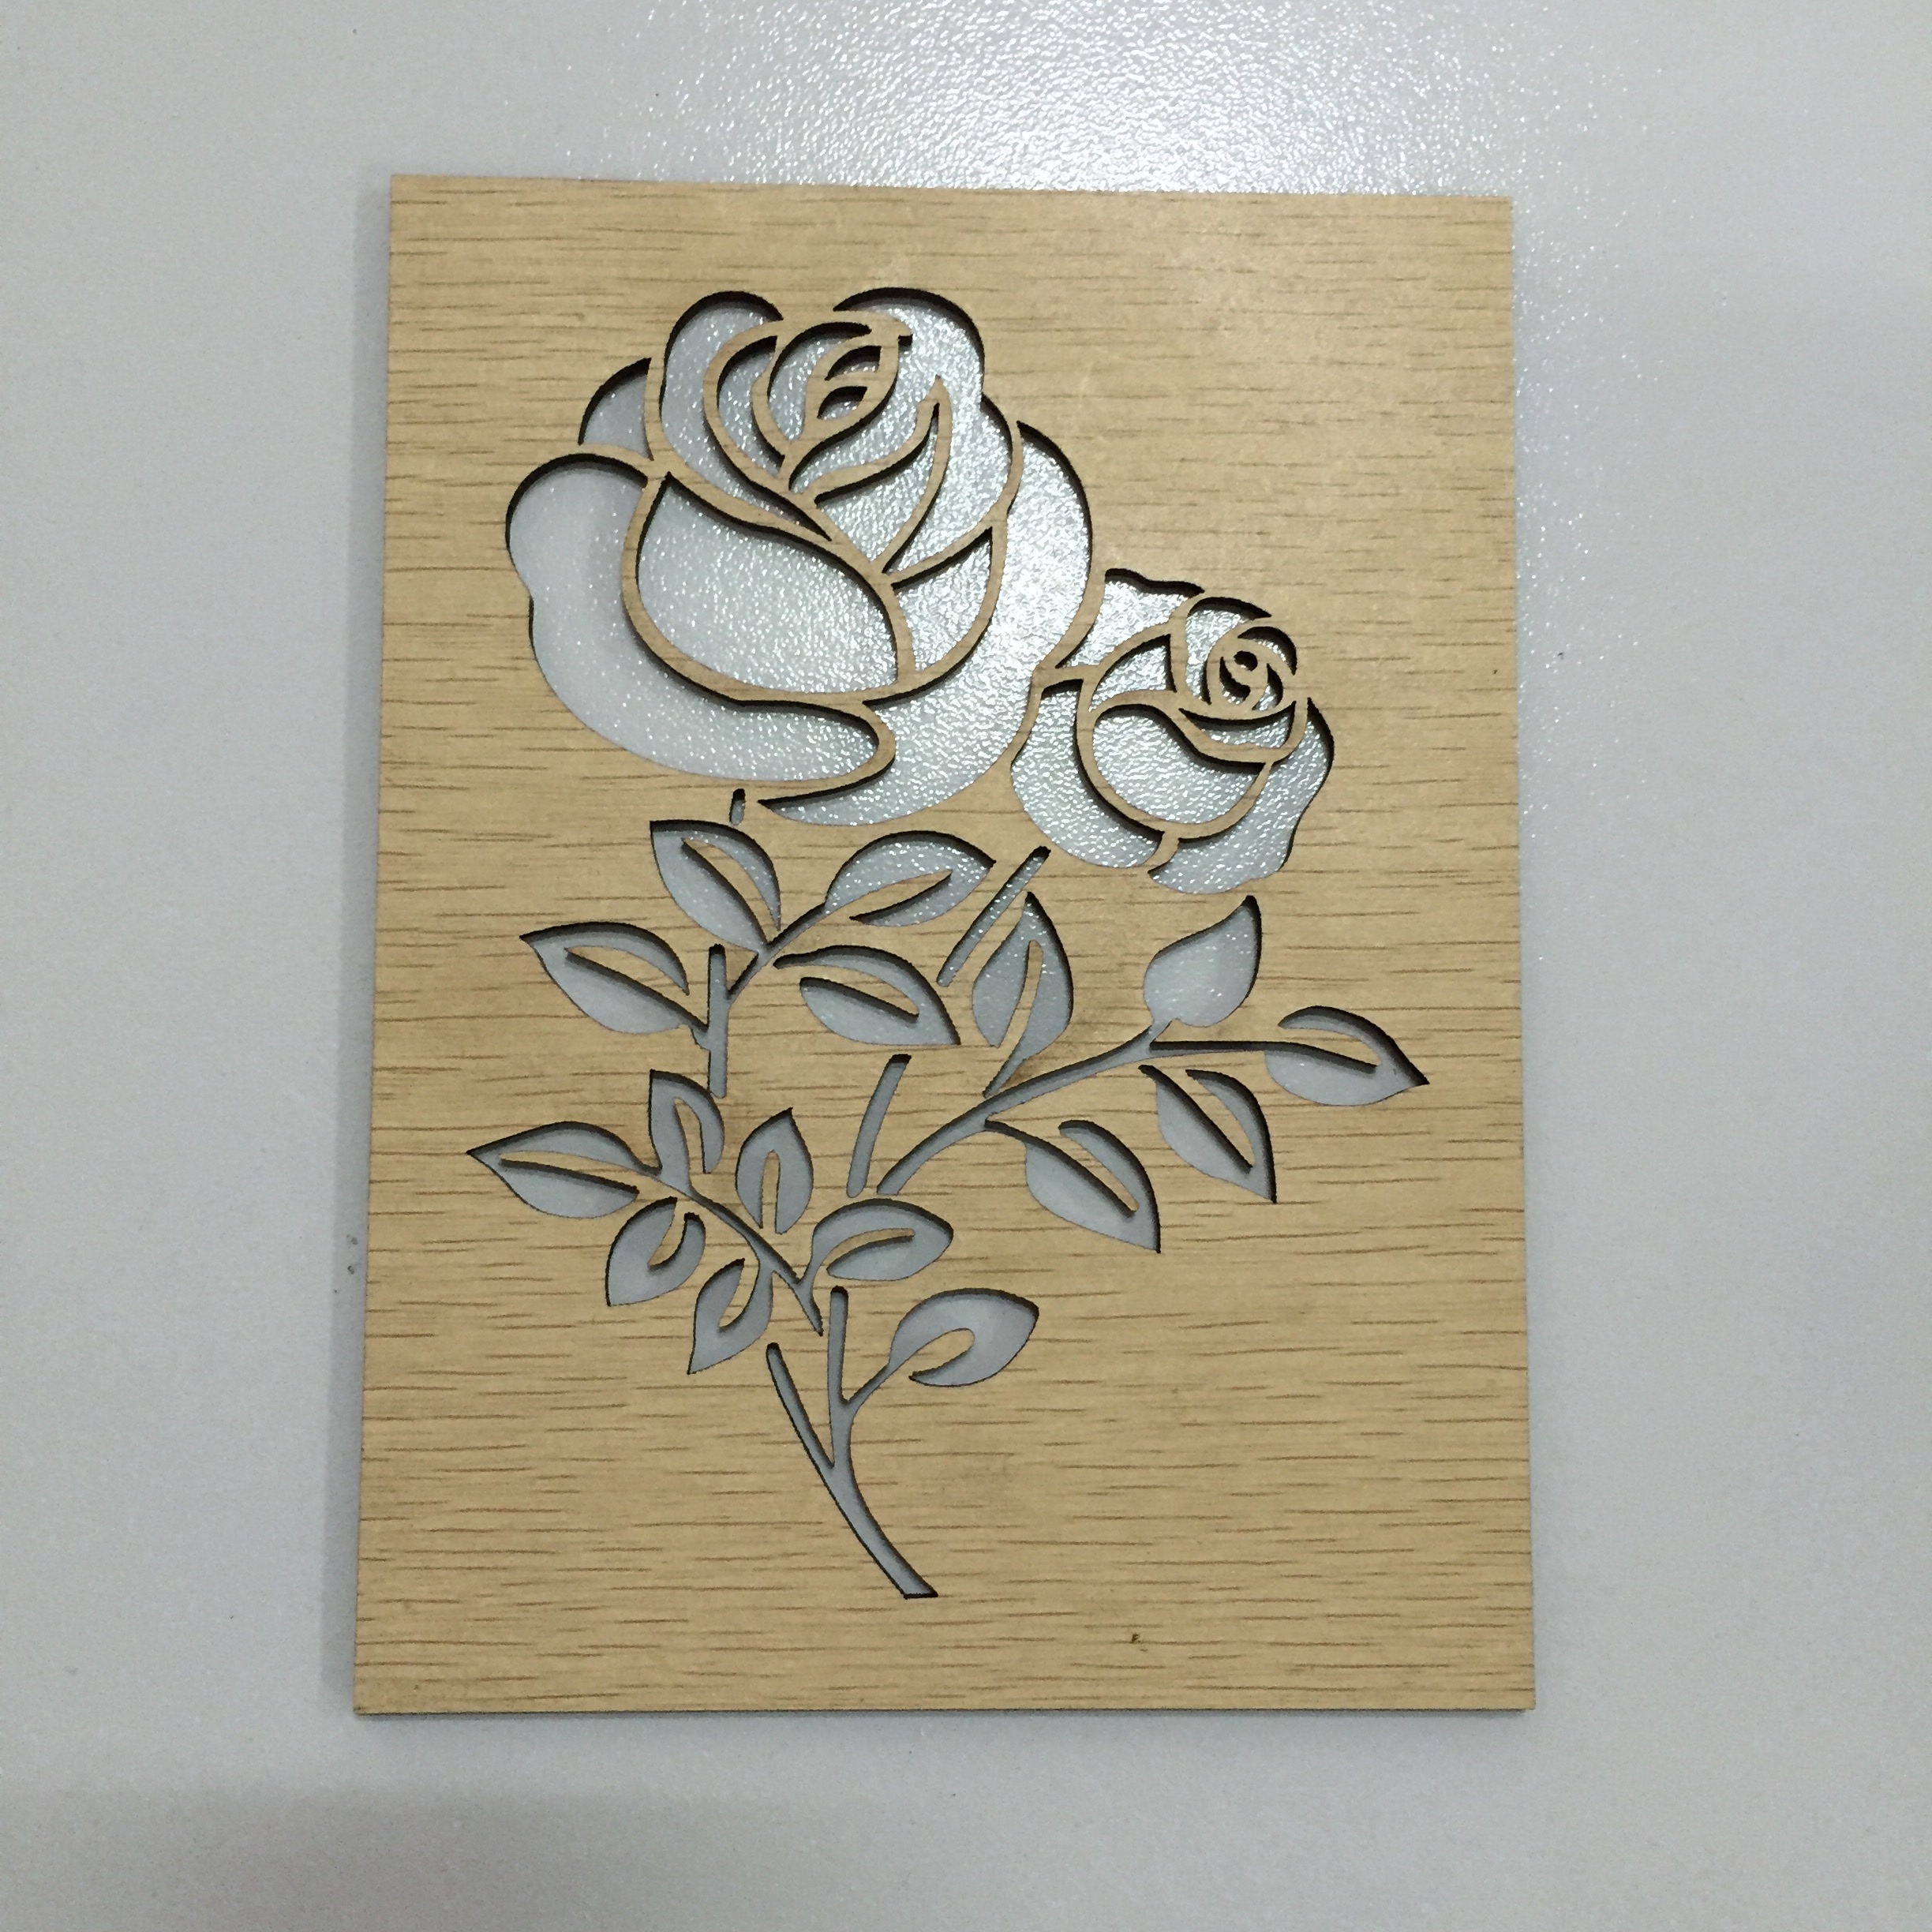 Best Wood For Laser Cutting And Engraving